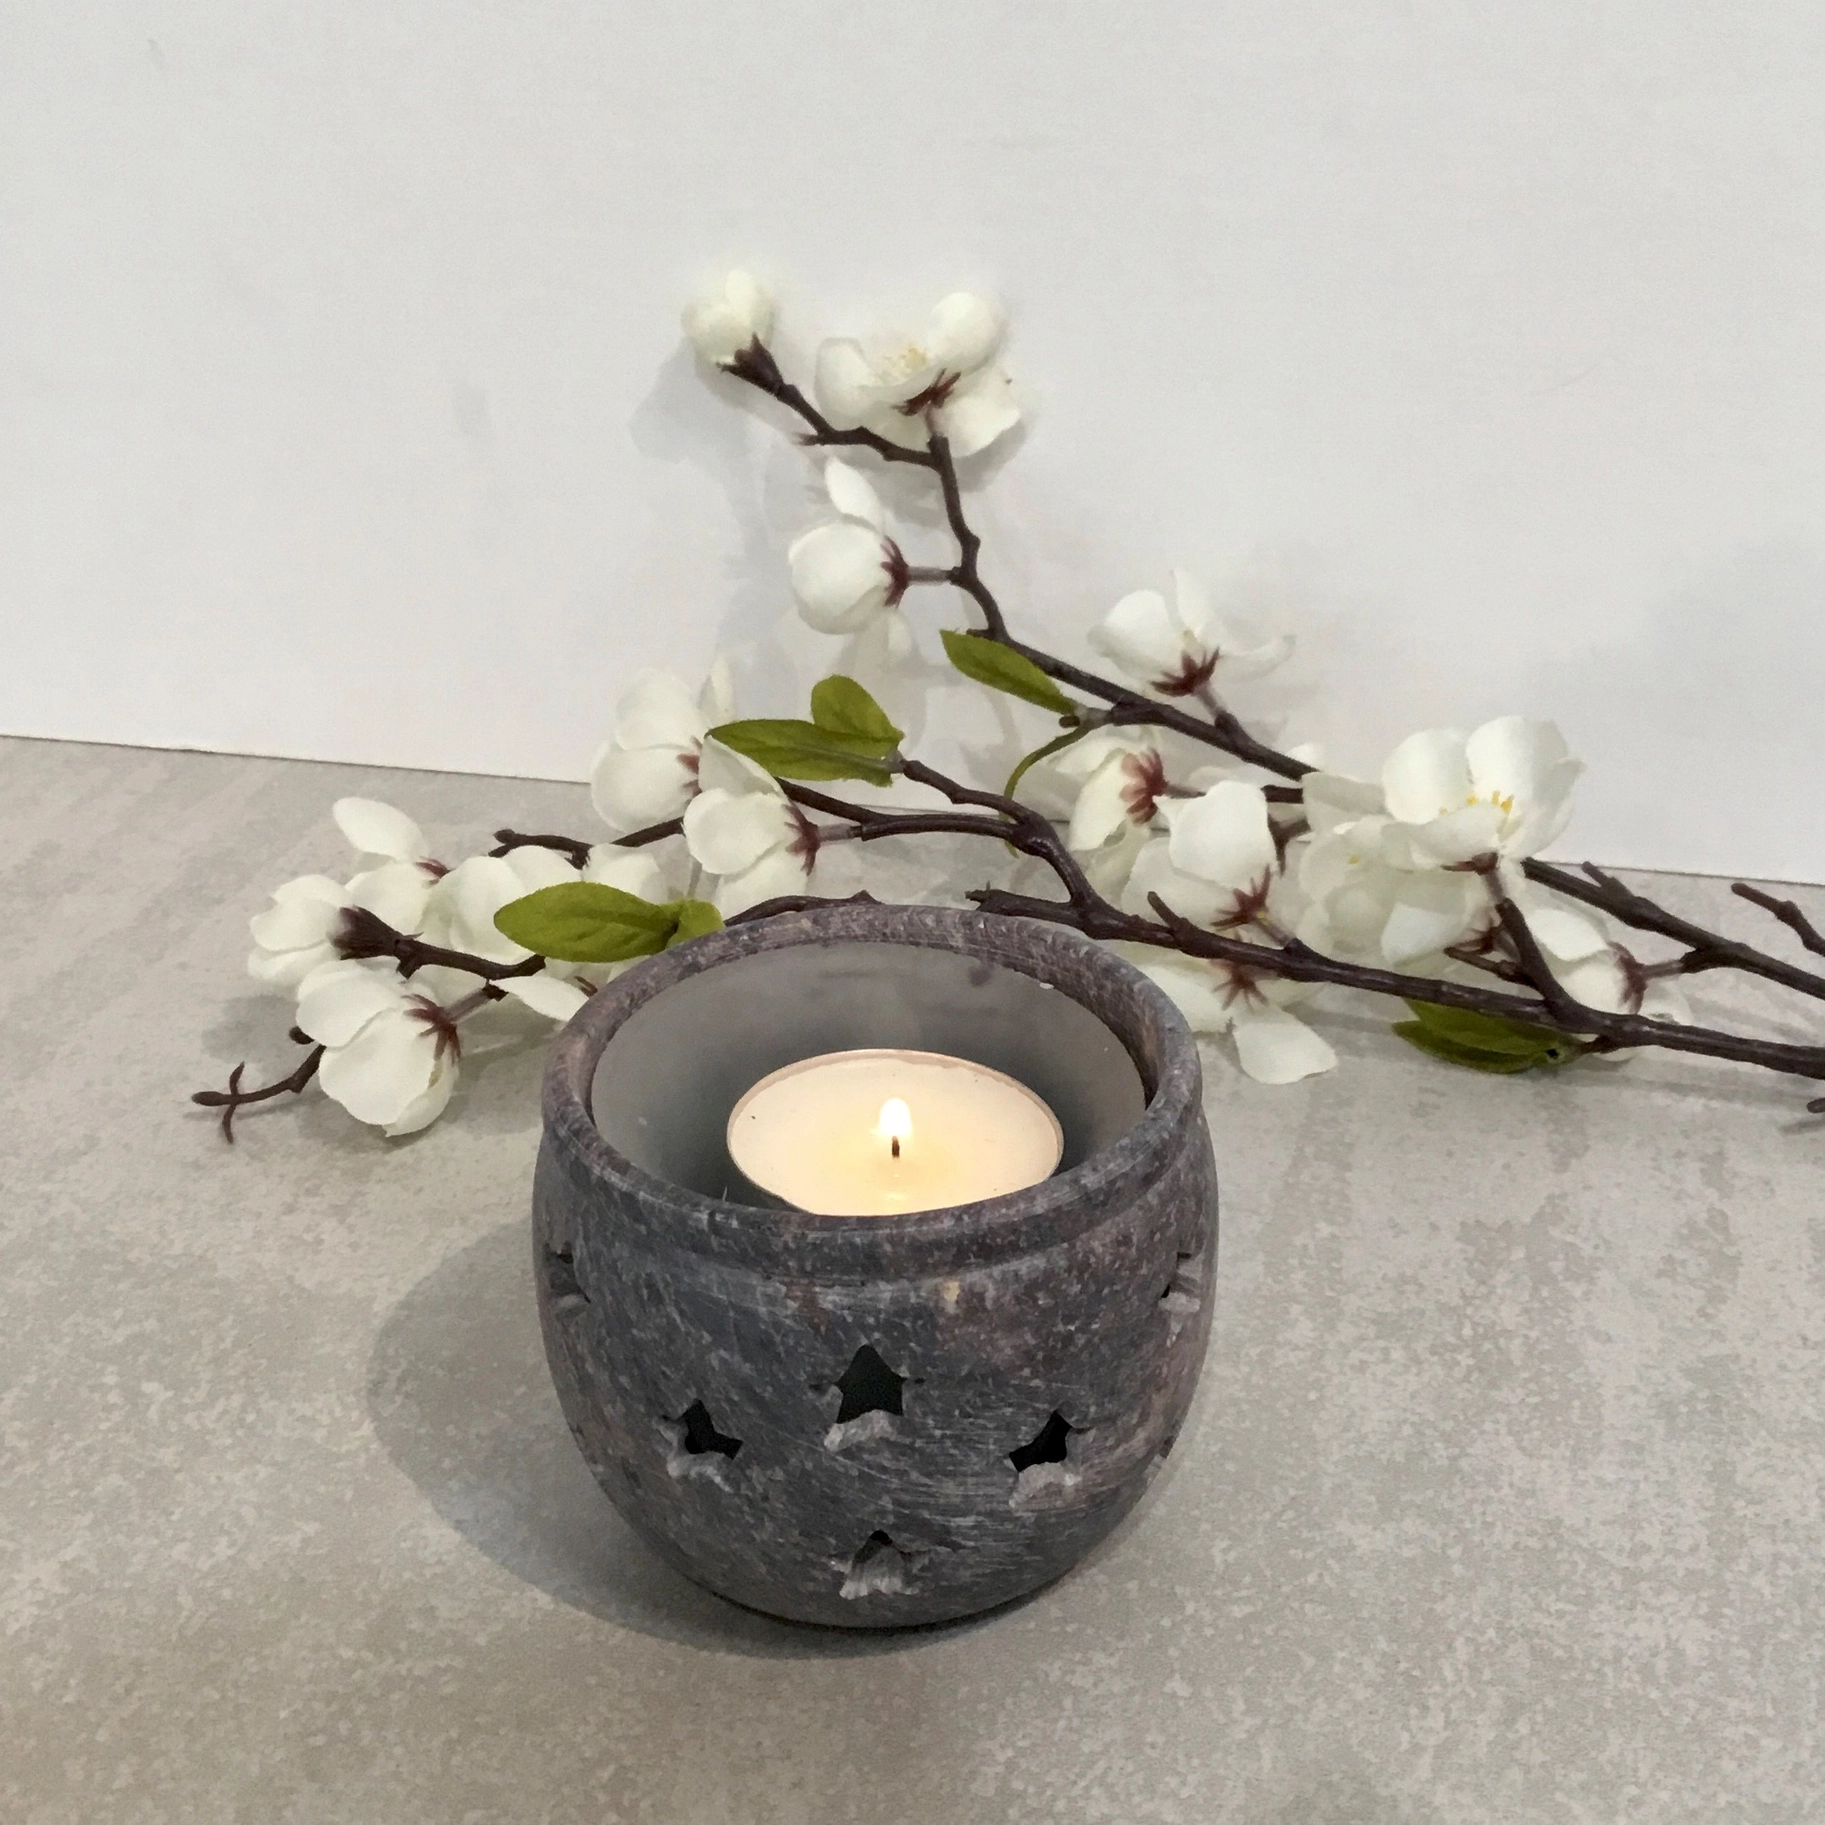 Stone votive tealight candle holder with star cutout design, with a lit tealight on a grey surface in front of white flowers.